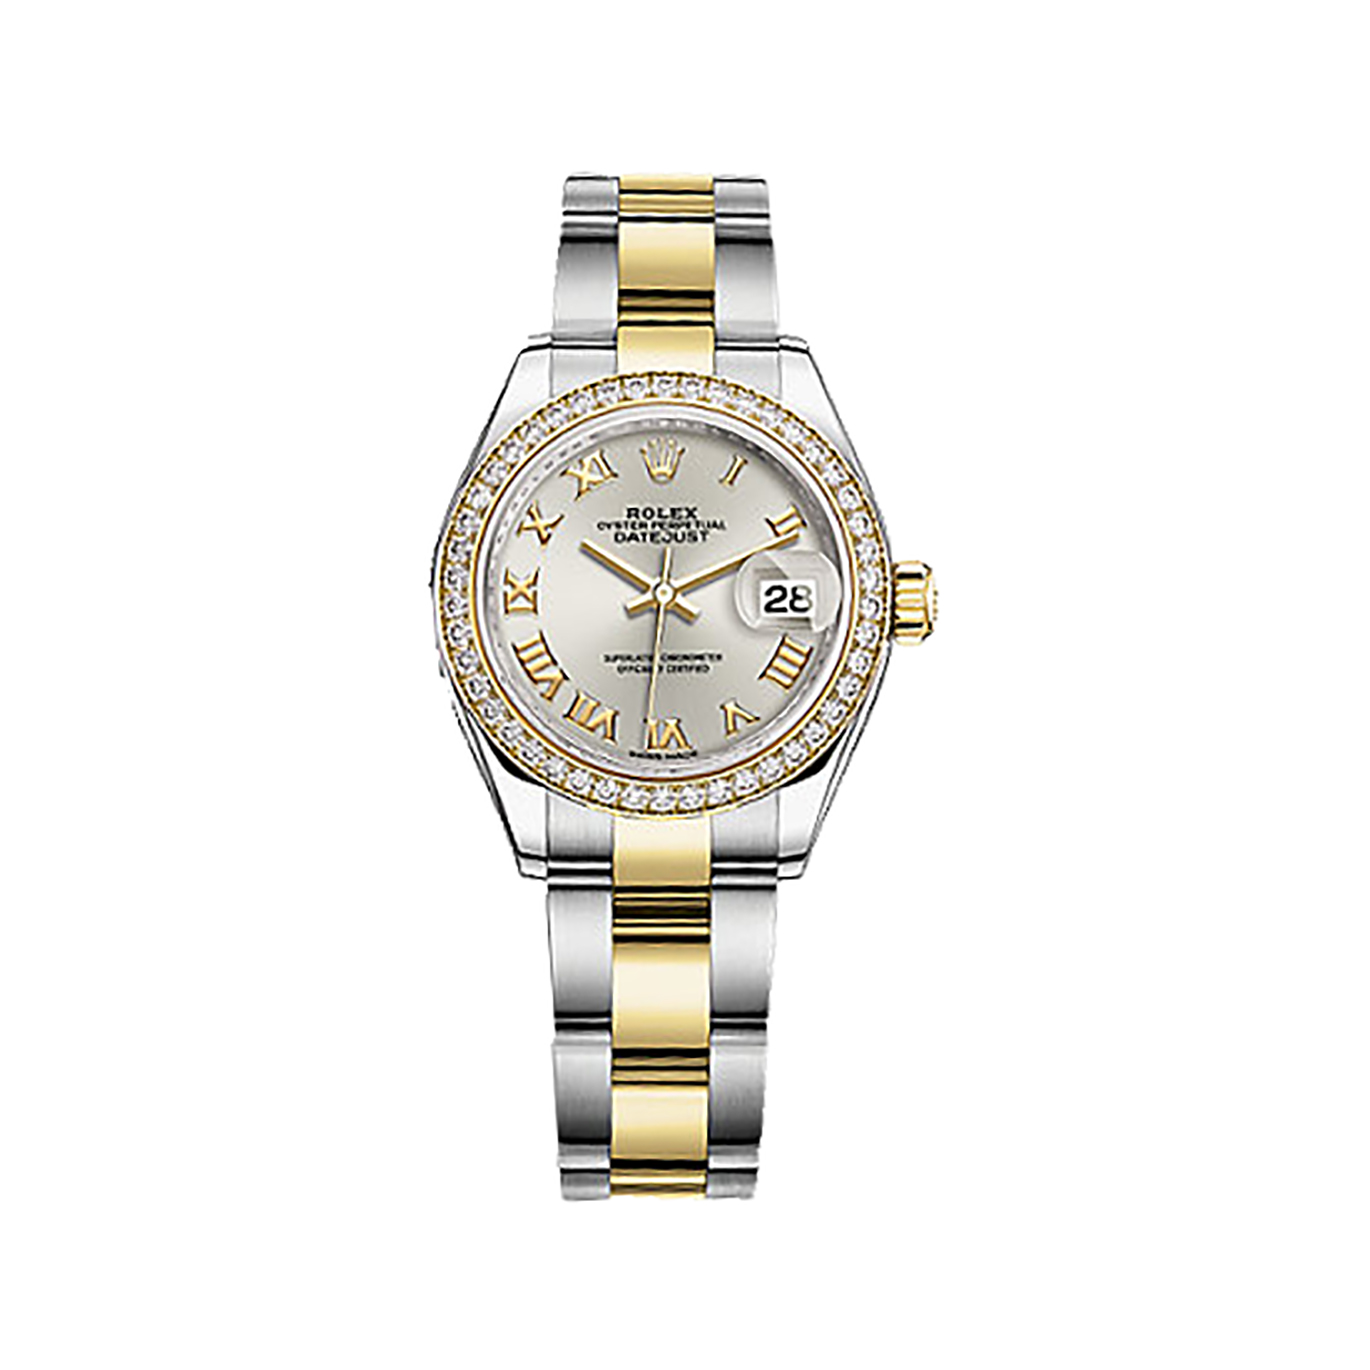 Lady-Datejust 28 279383RBR Gold & Stainless Steel & Diamonds Watch (Silver)